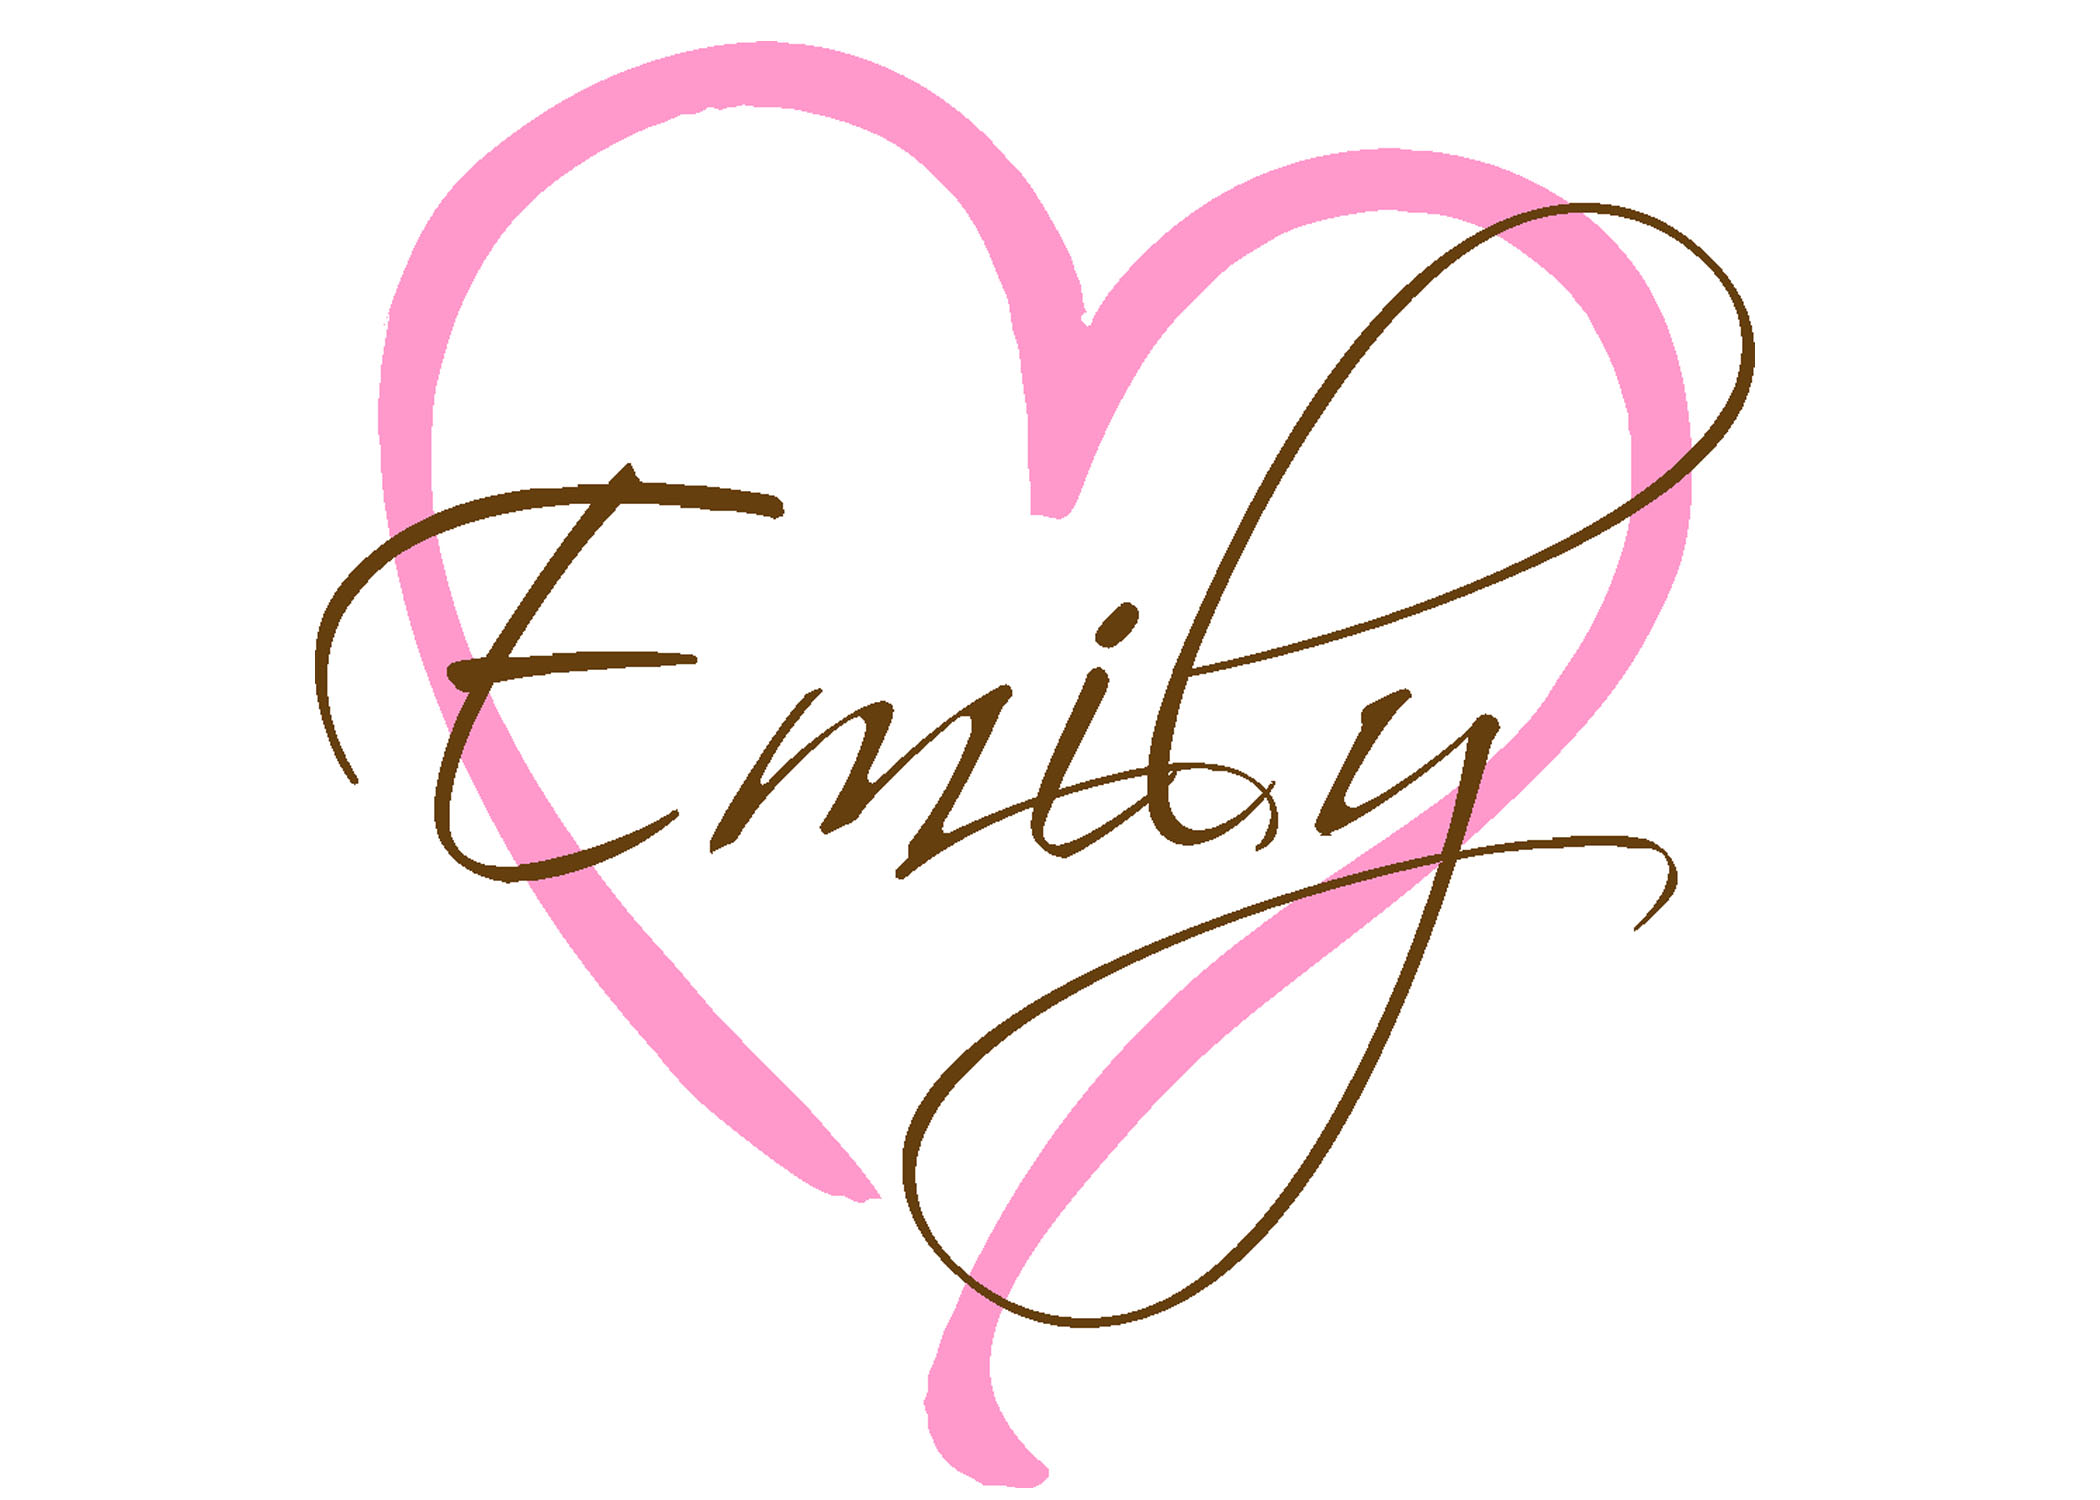 https://wildeyessigns.com/wp-content/uploads/2013/01/name-with-heart-Emily.jpg